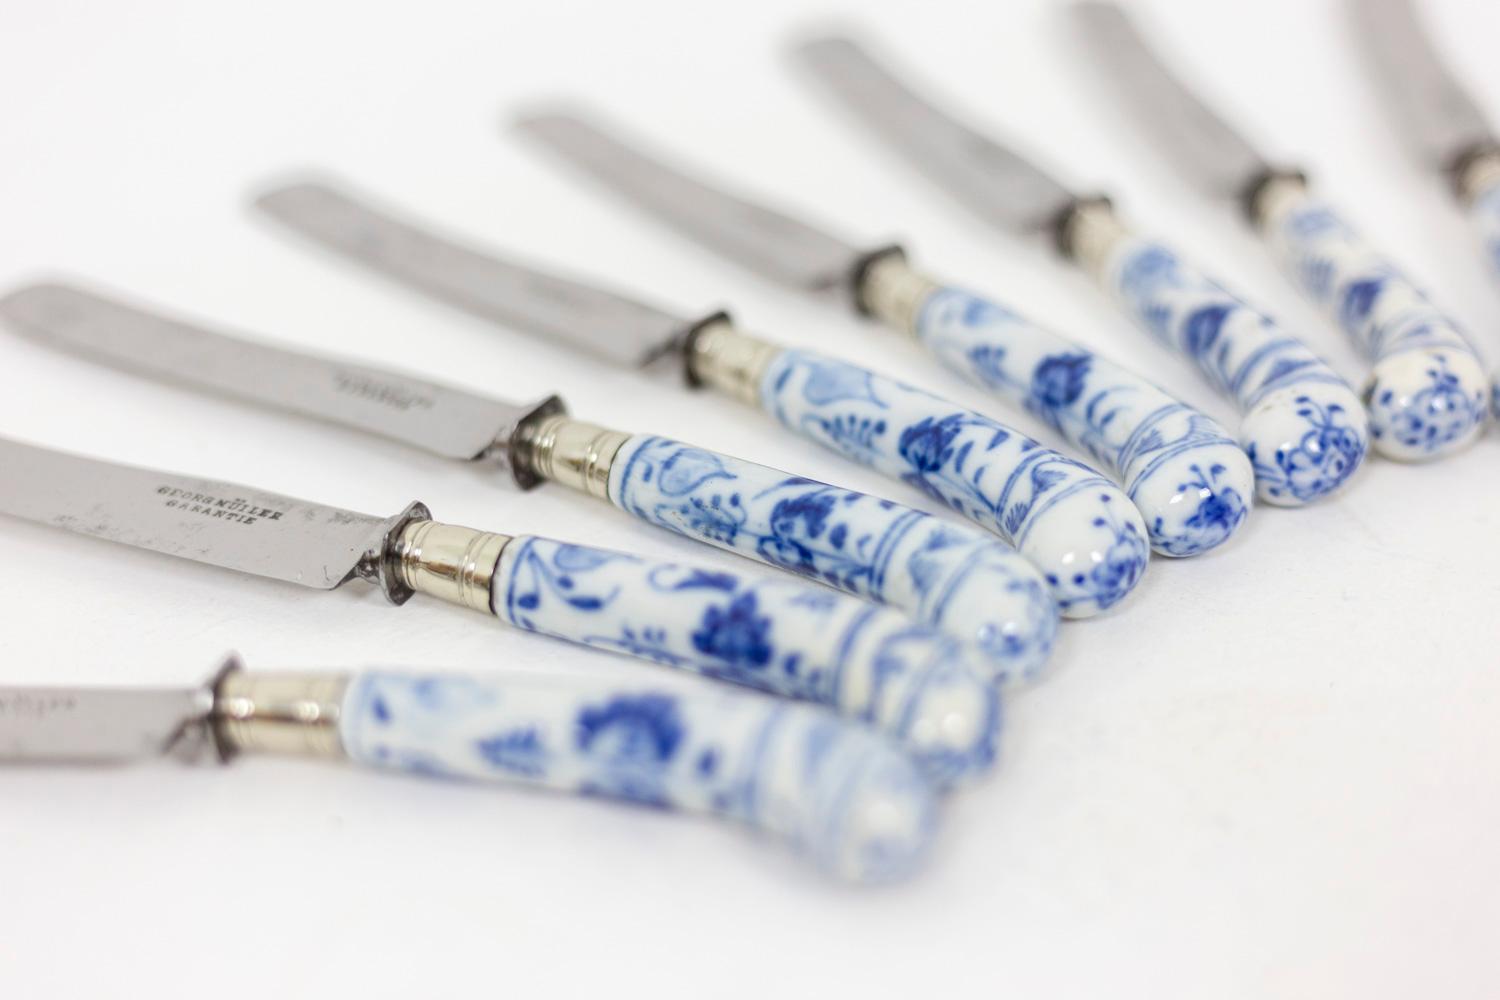 Set of 11 knives with curved blue and white enameled handles decorated with a vegetal decor. Curved silver blade. Signed Georg Müller Garantie on the blade.

Work realized in the 19th century.

Uses on the steel blade.